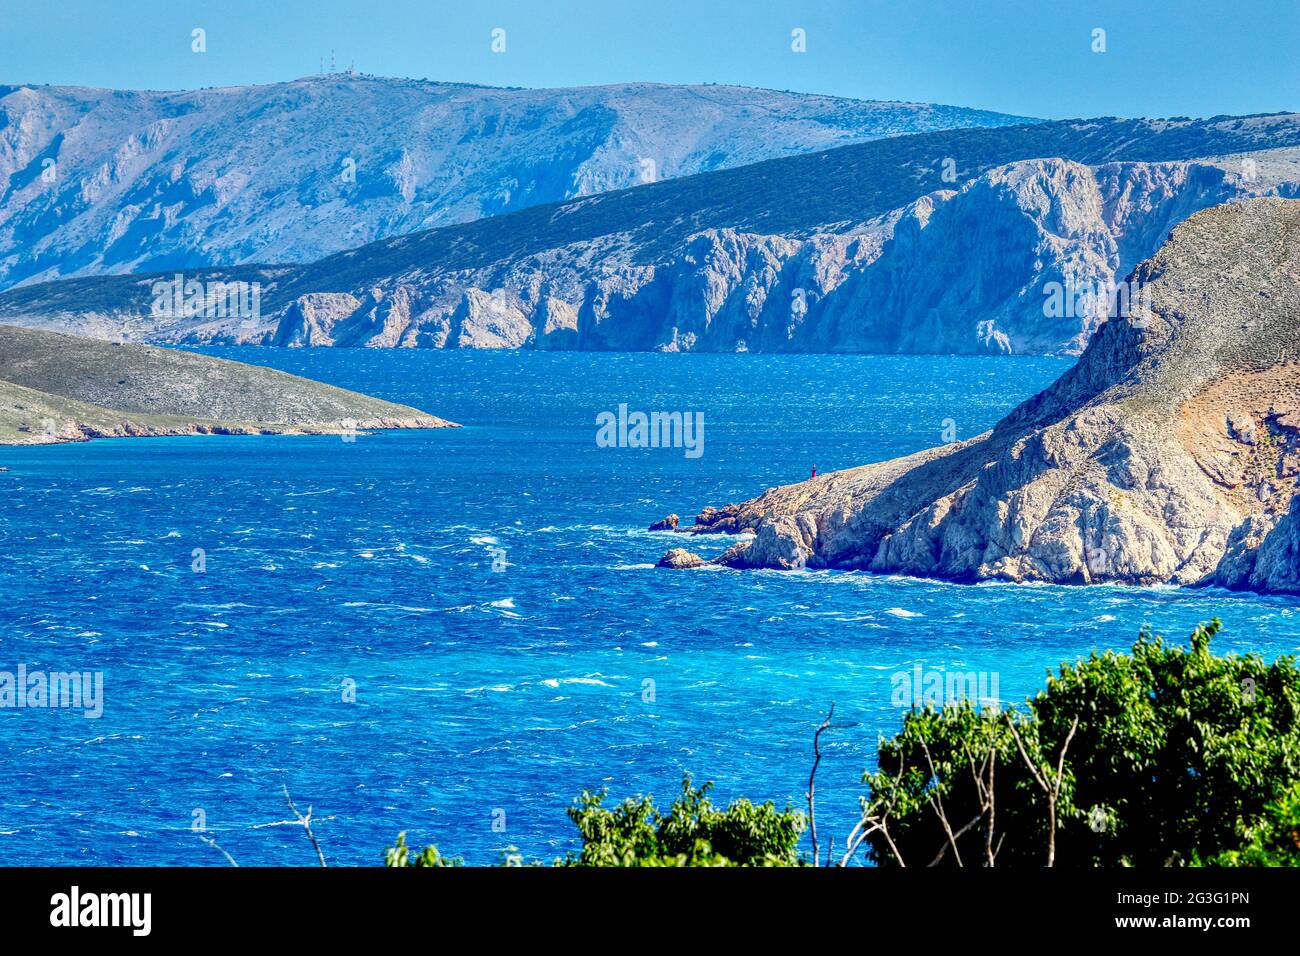 scenic view of the adriatic sea with some islands Stock Photo